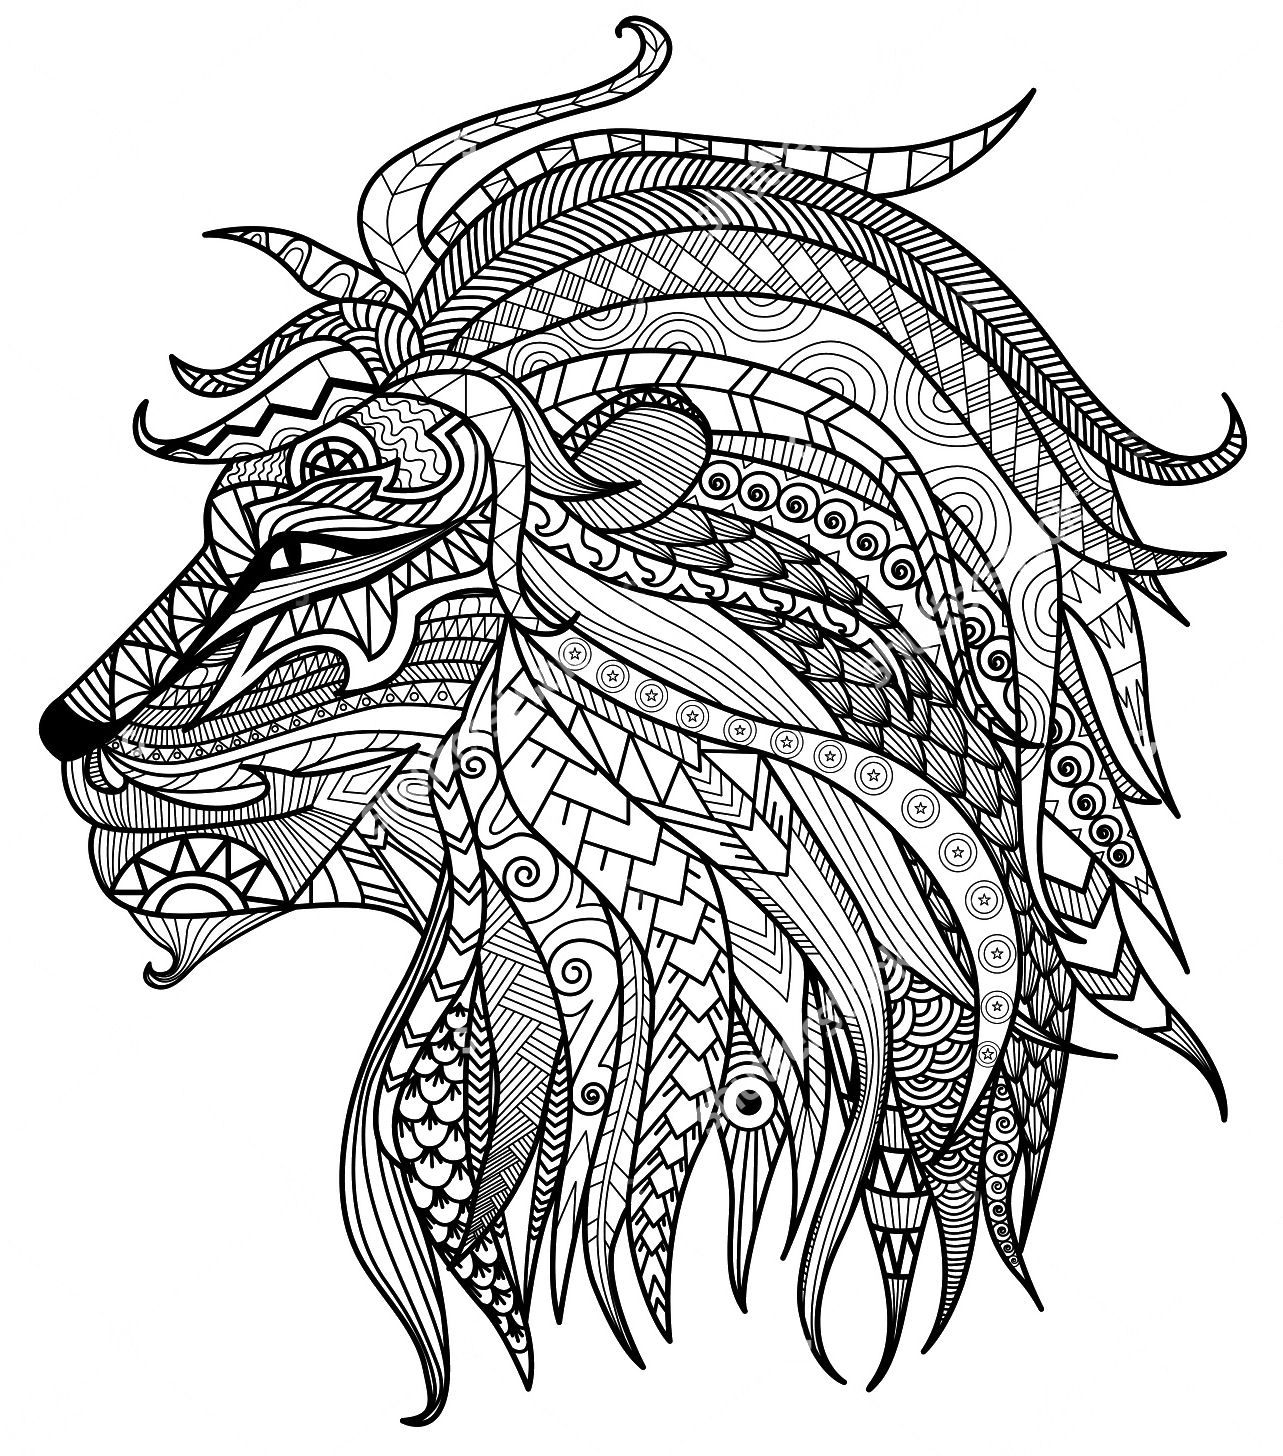 colouring pictures of lions fun learn free worksheets for kid ภาพระบายส the lion lions pictures colouring of 